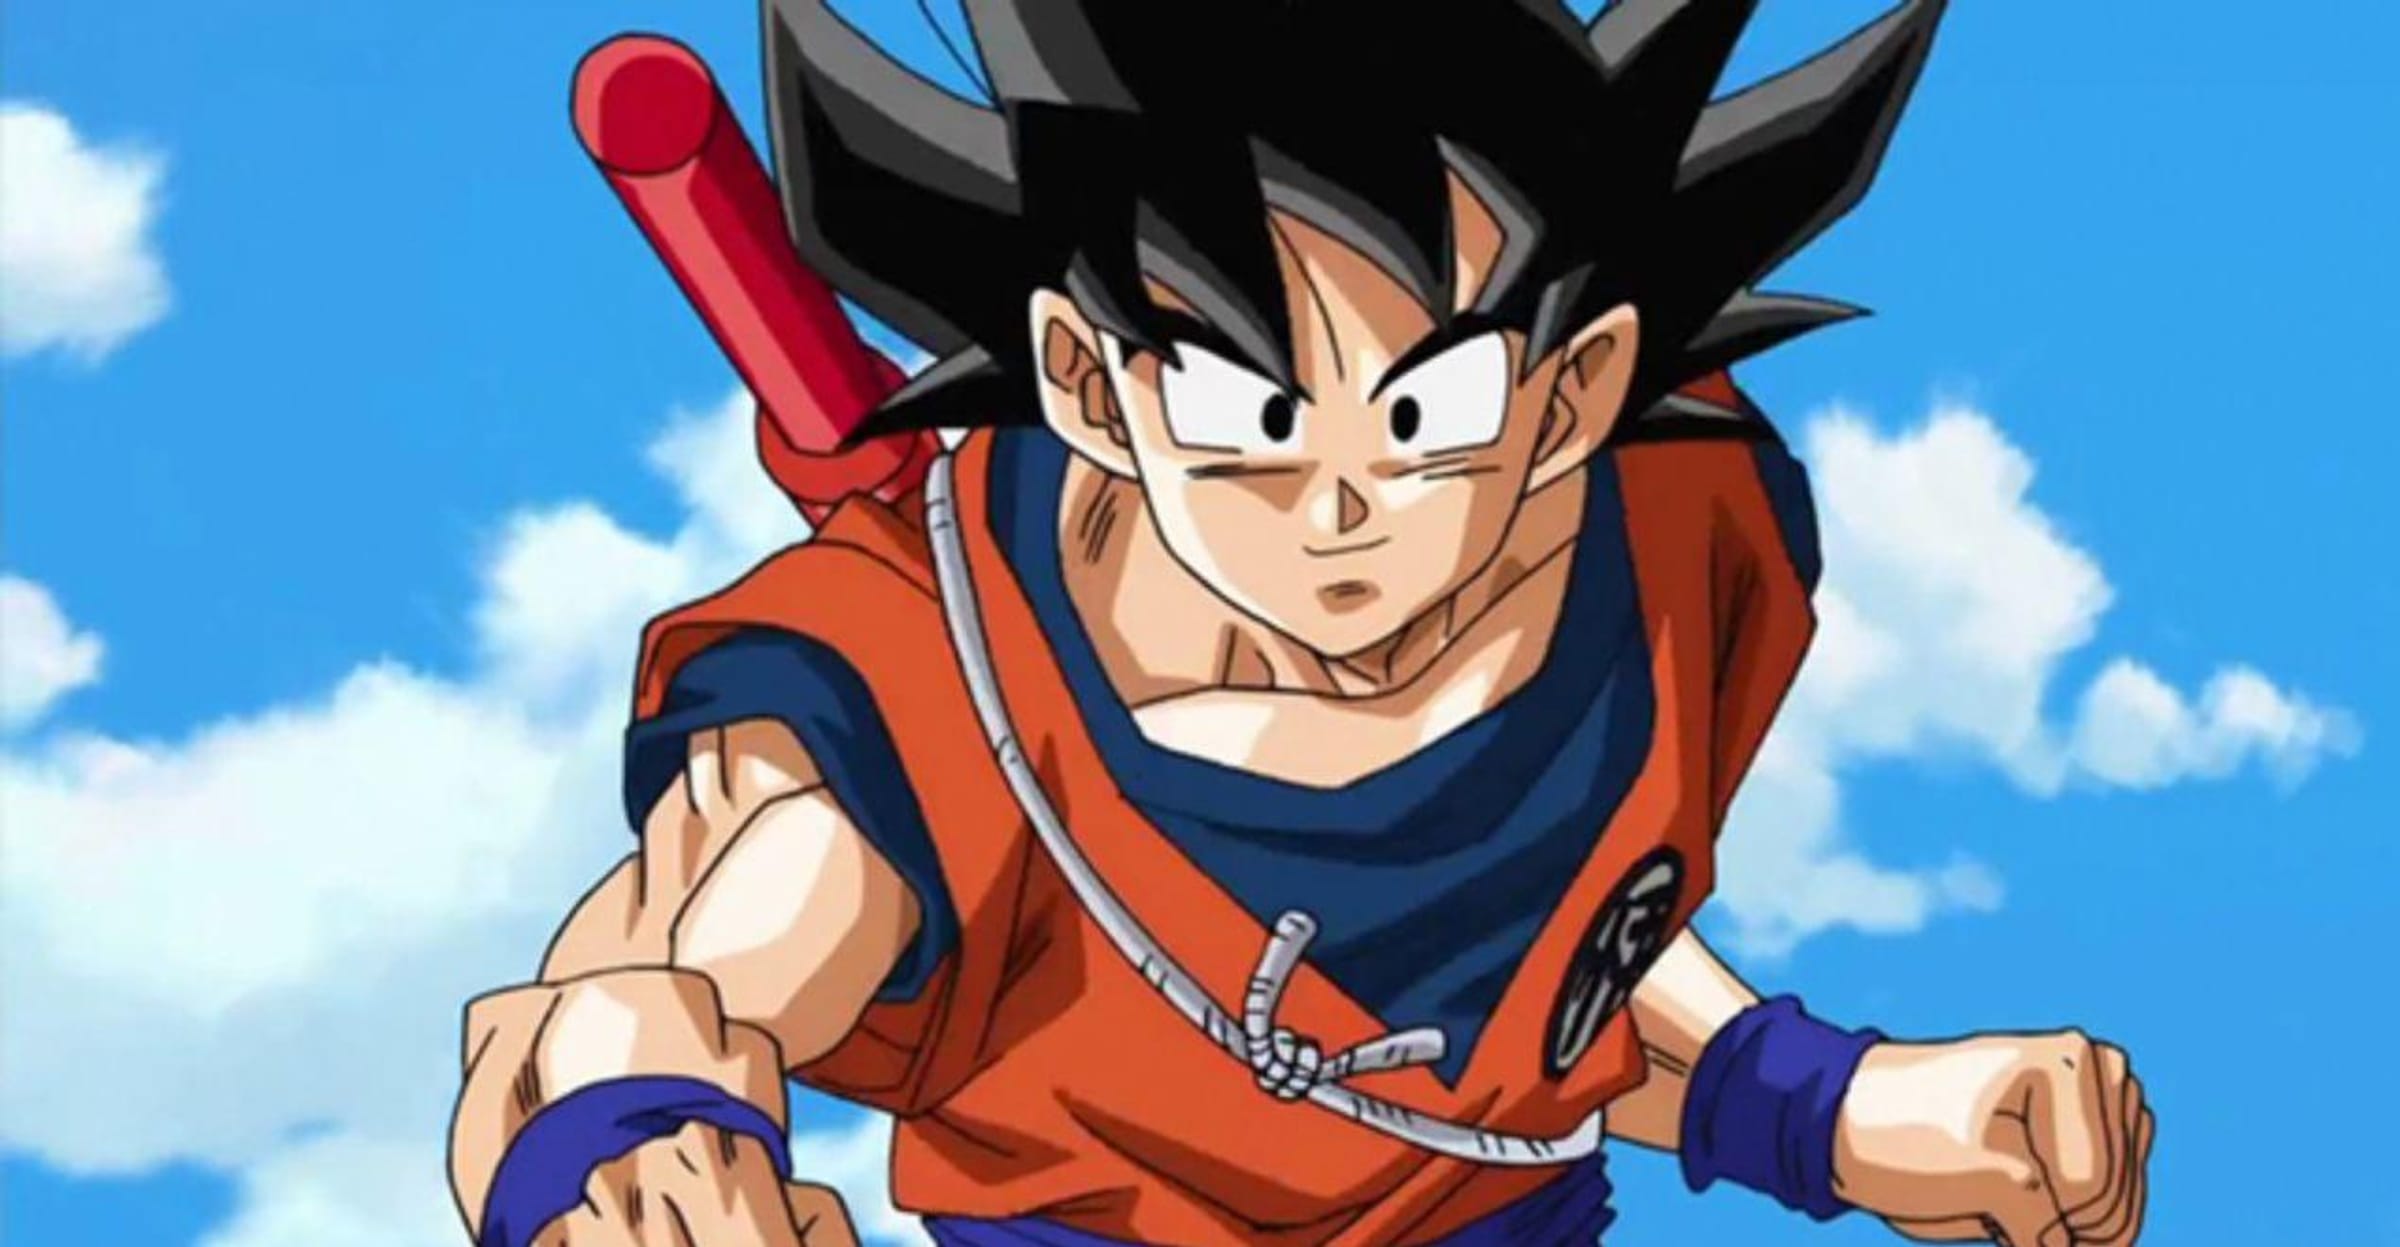 Dragon Ball Z': The most memorable quotes by Vegeta ranked